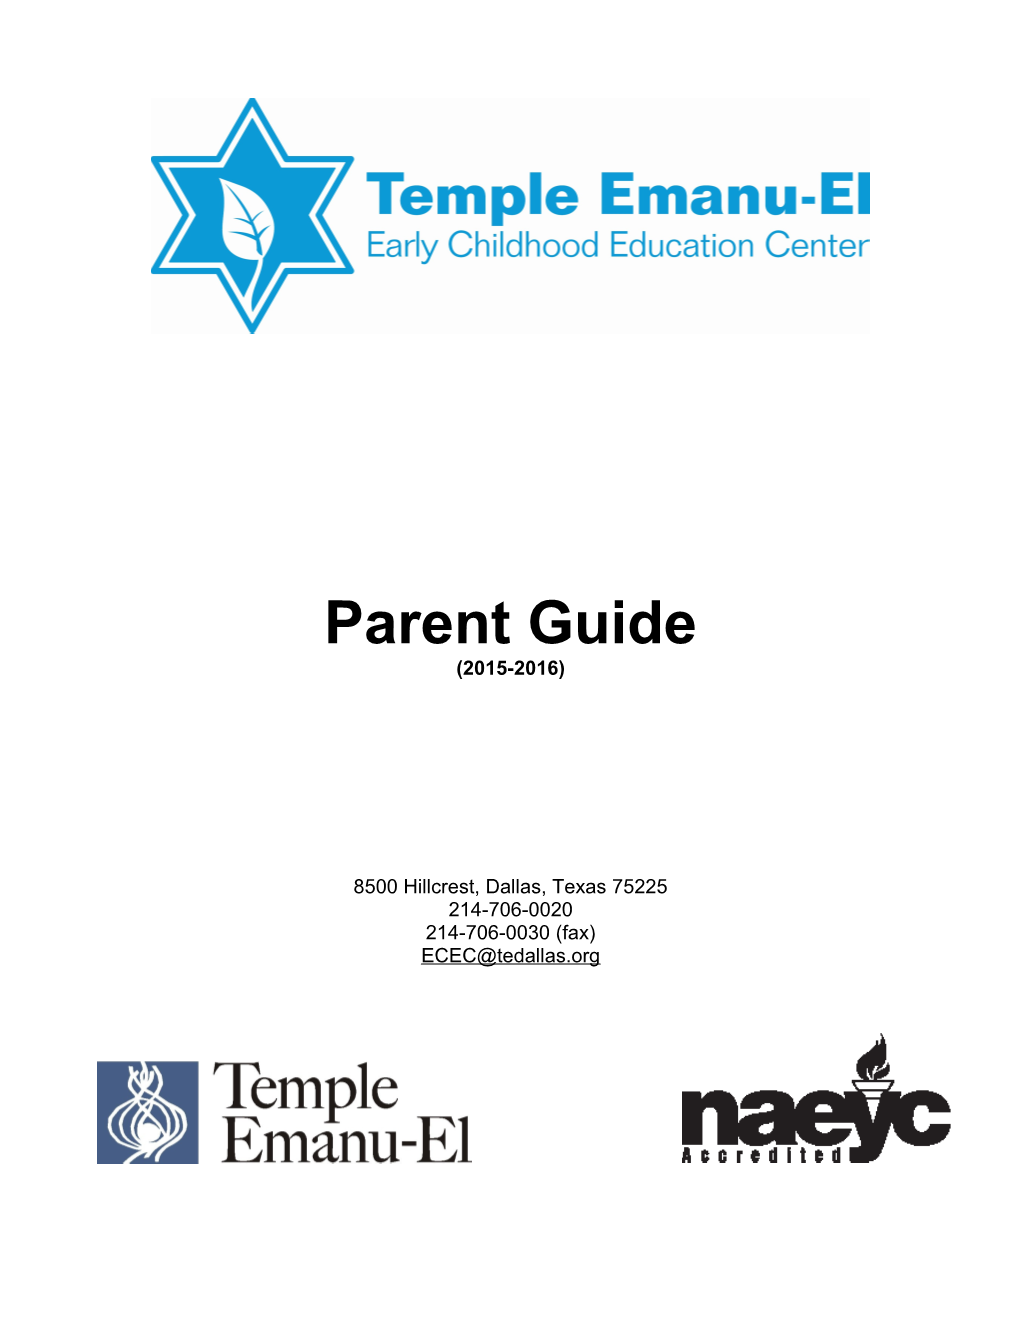 History of Temple Emanu-El Early Childhood Education Center